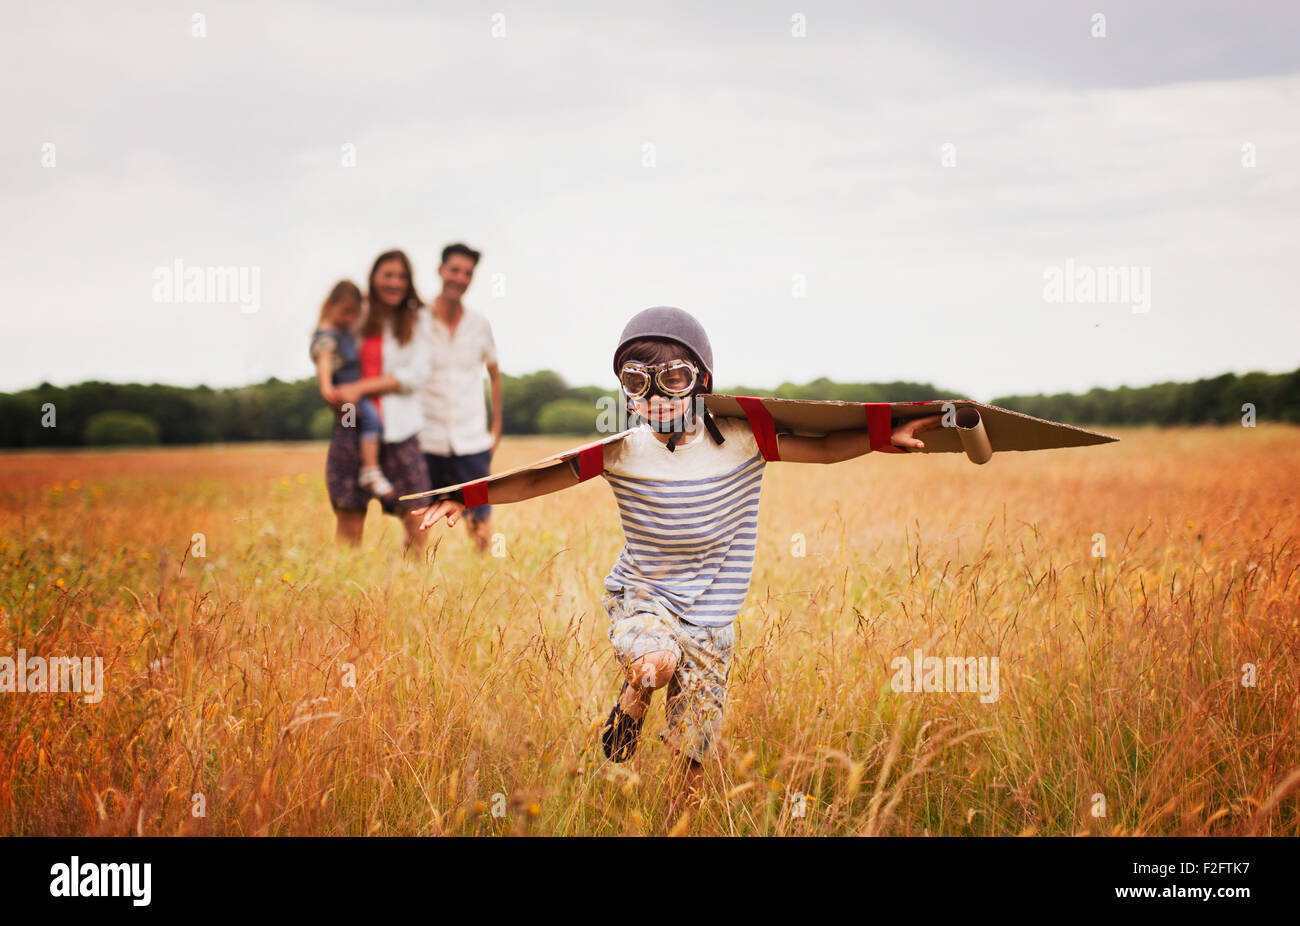 Playful boy with wings in aviator’s cap and flying goggles in field Stock Photo